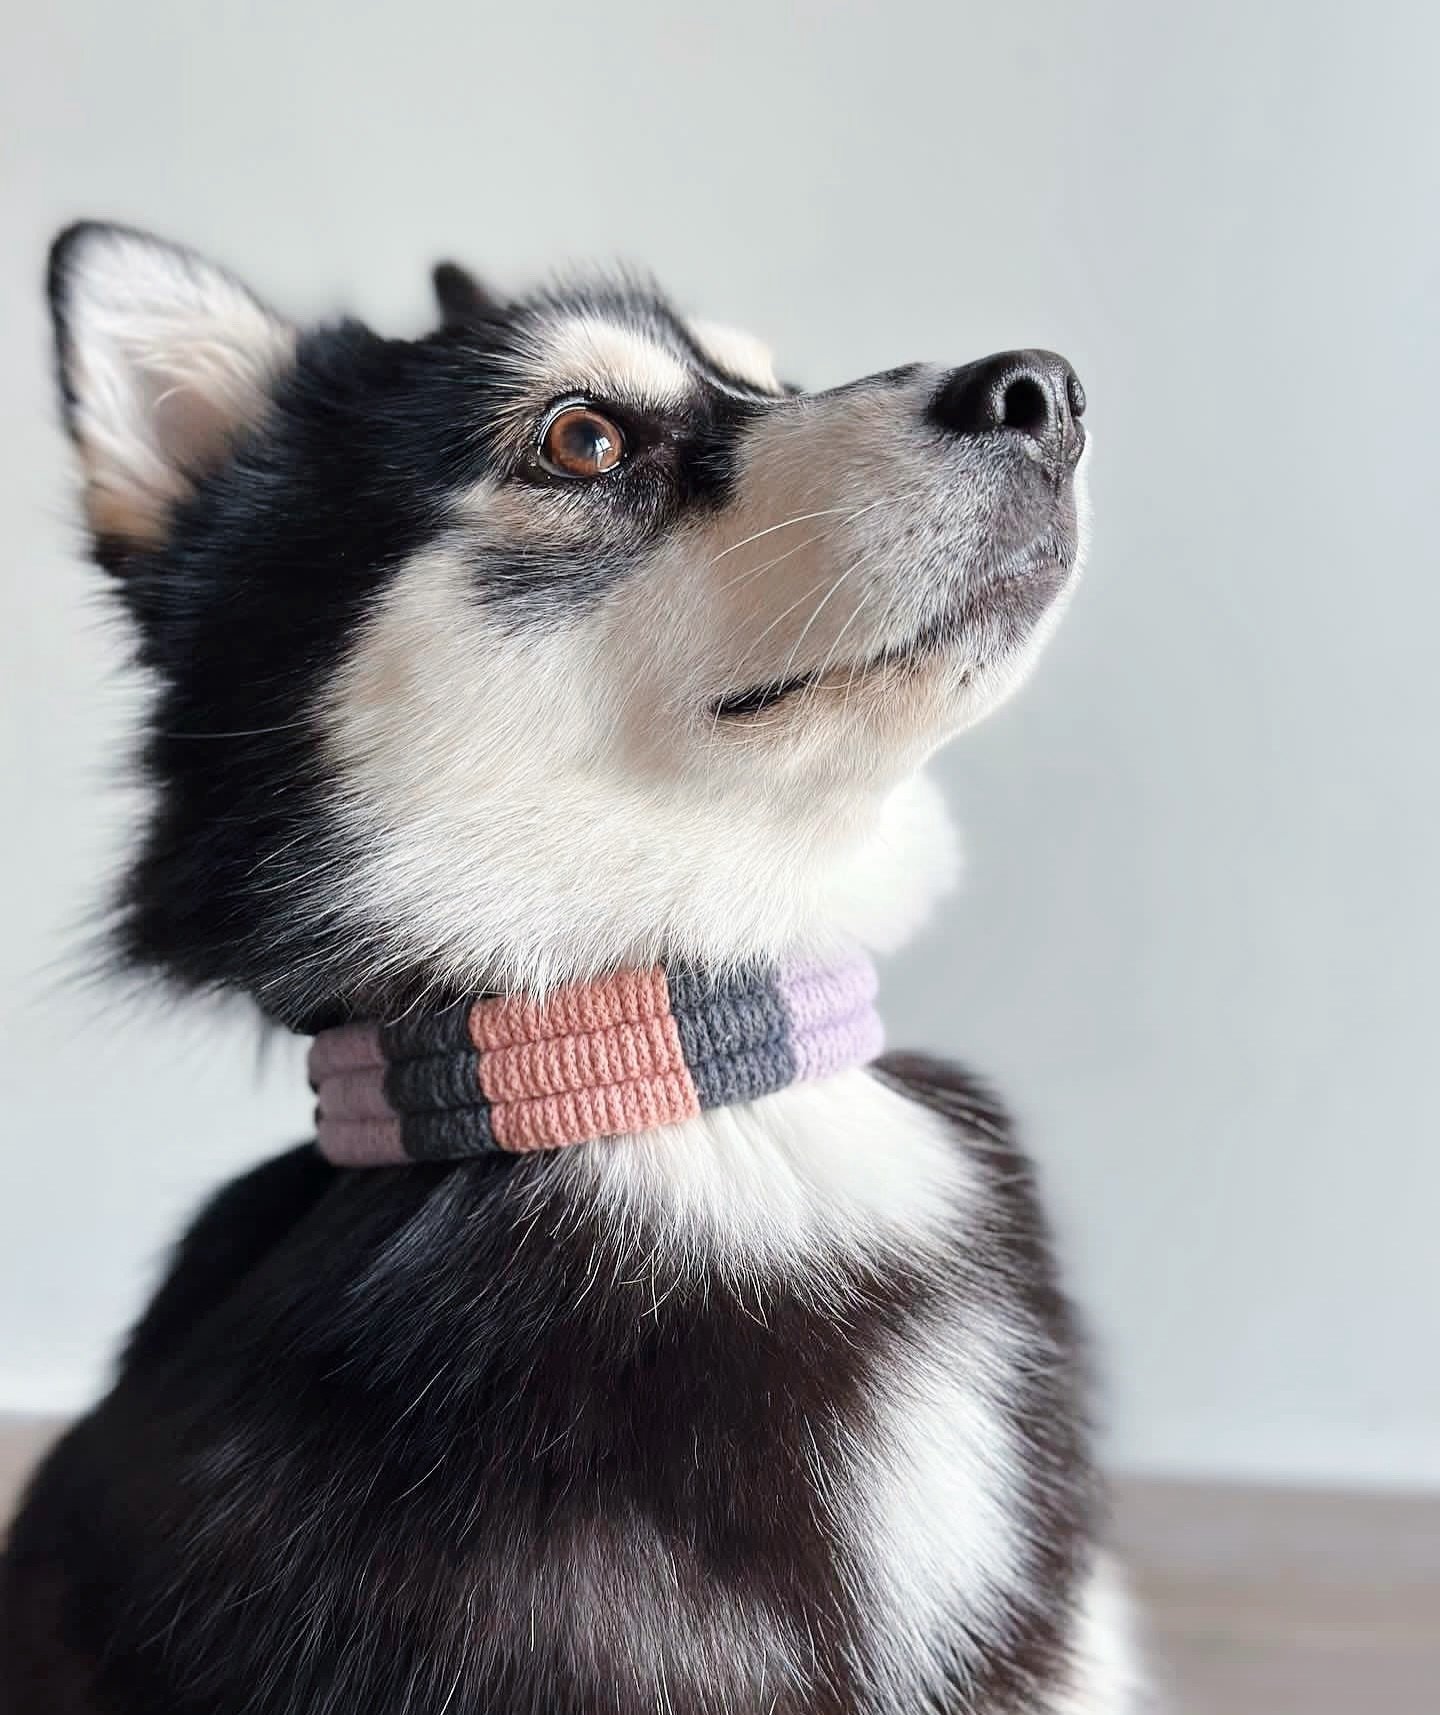 Simple 𝘽𝙤𝙝𝙚𝙢𝙞𝙖 collar with better look like @myra.thepomsky ✨

𝑼𝒑𝒅𝒂𝒕𝒆 // The last Initial Letter Tag launch was AMAZING! We were so stoked by the amount of supports we&rsquo;ve received from you all 🫶
That also means that the production